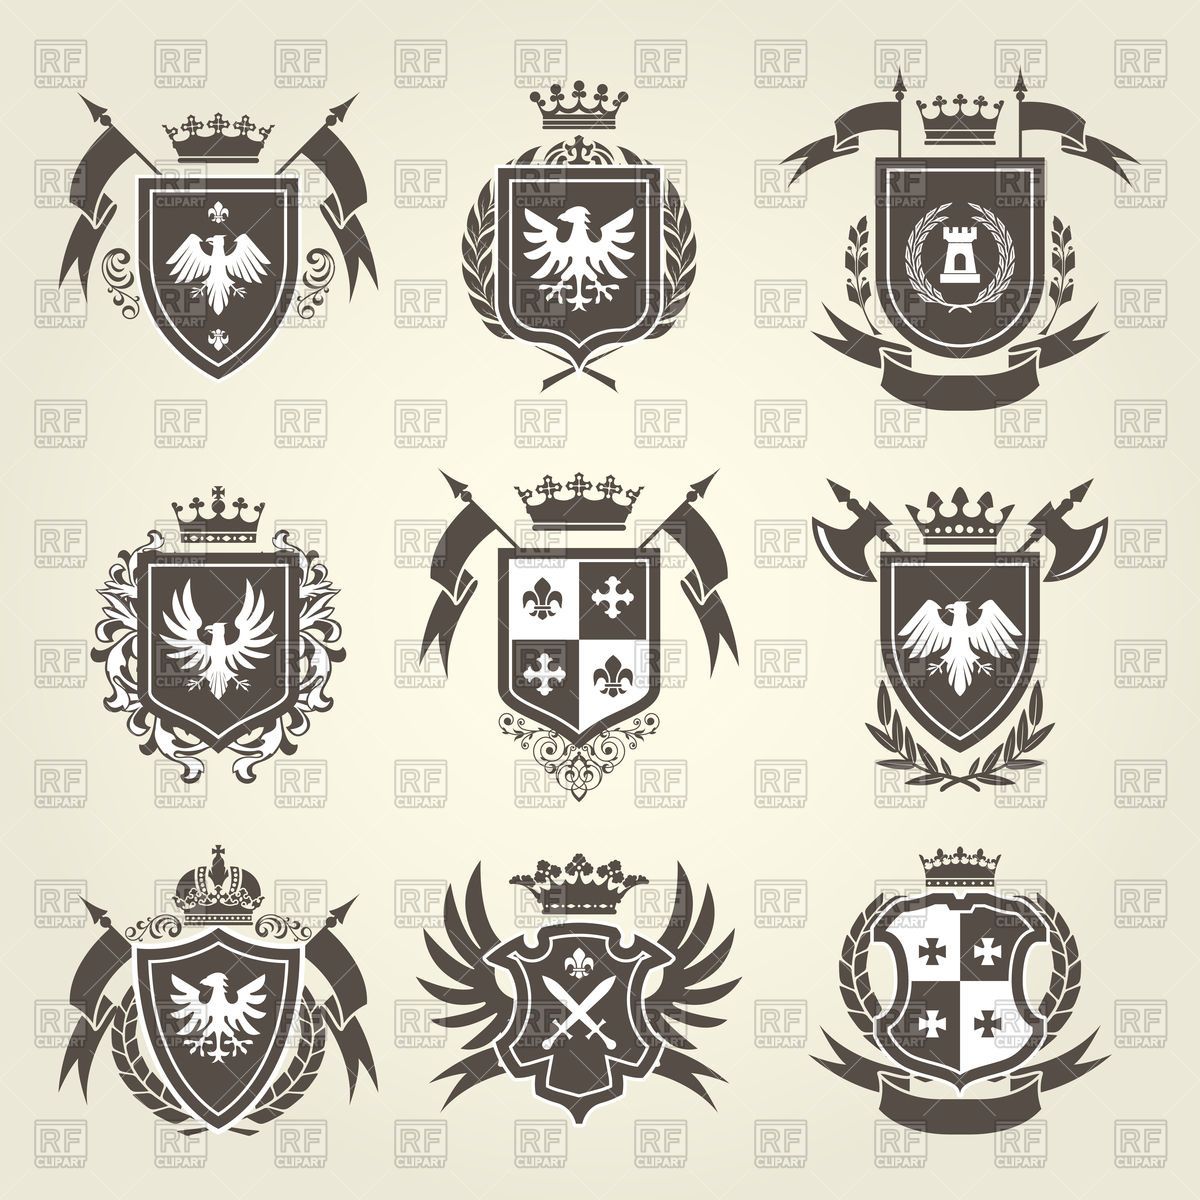 Medieval royal coat of arms and knight emblems